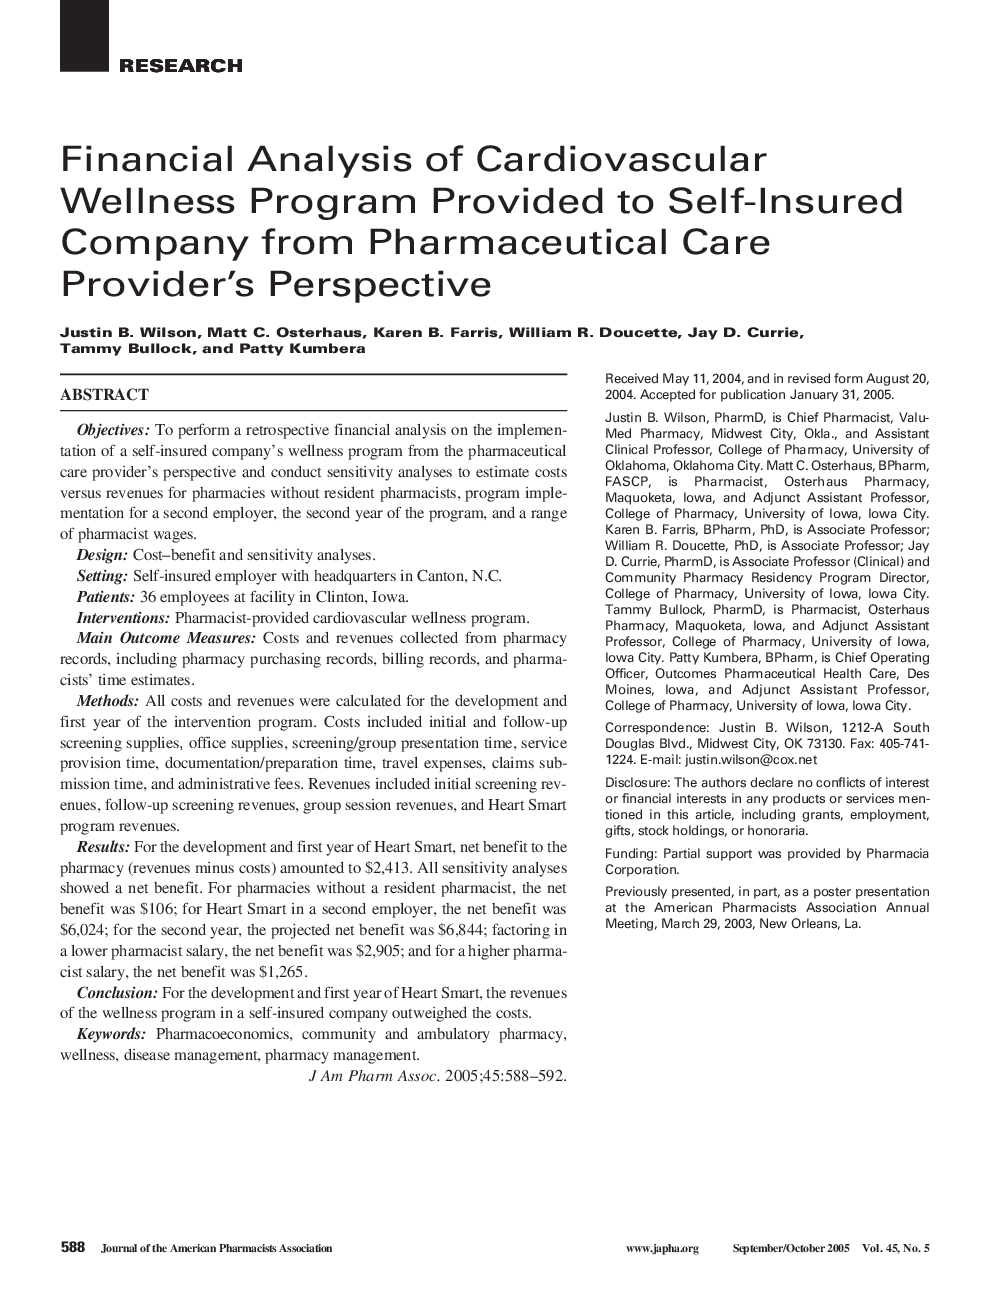 Financial Analysis of Cardiovascular Wellness Program Provided to Self-Insured Company from Pharmaceutical Care Provider's Perspective